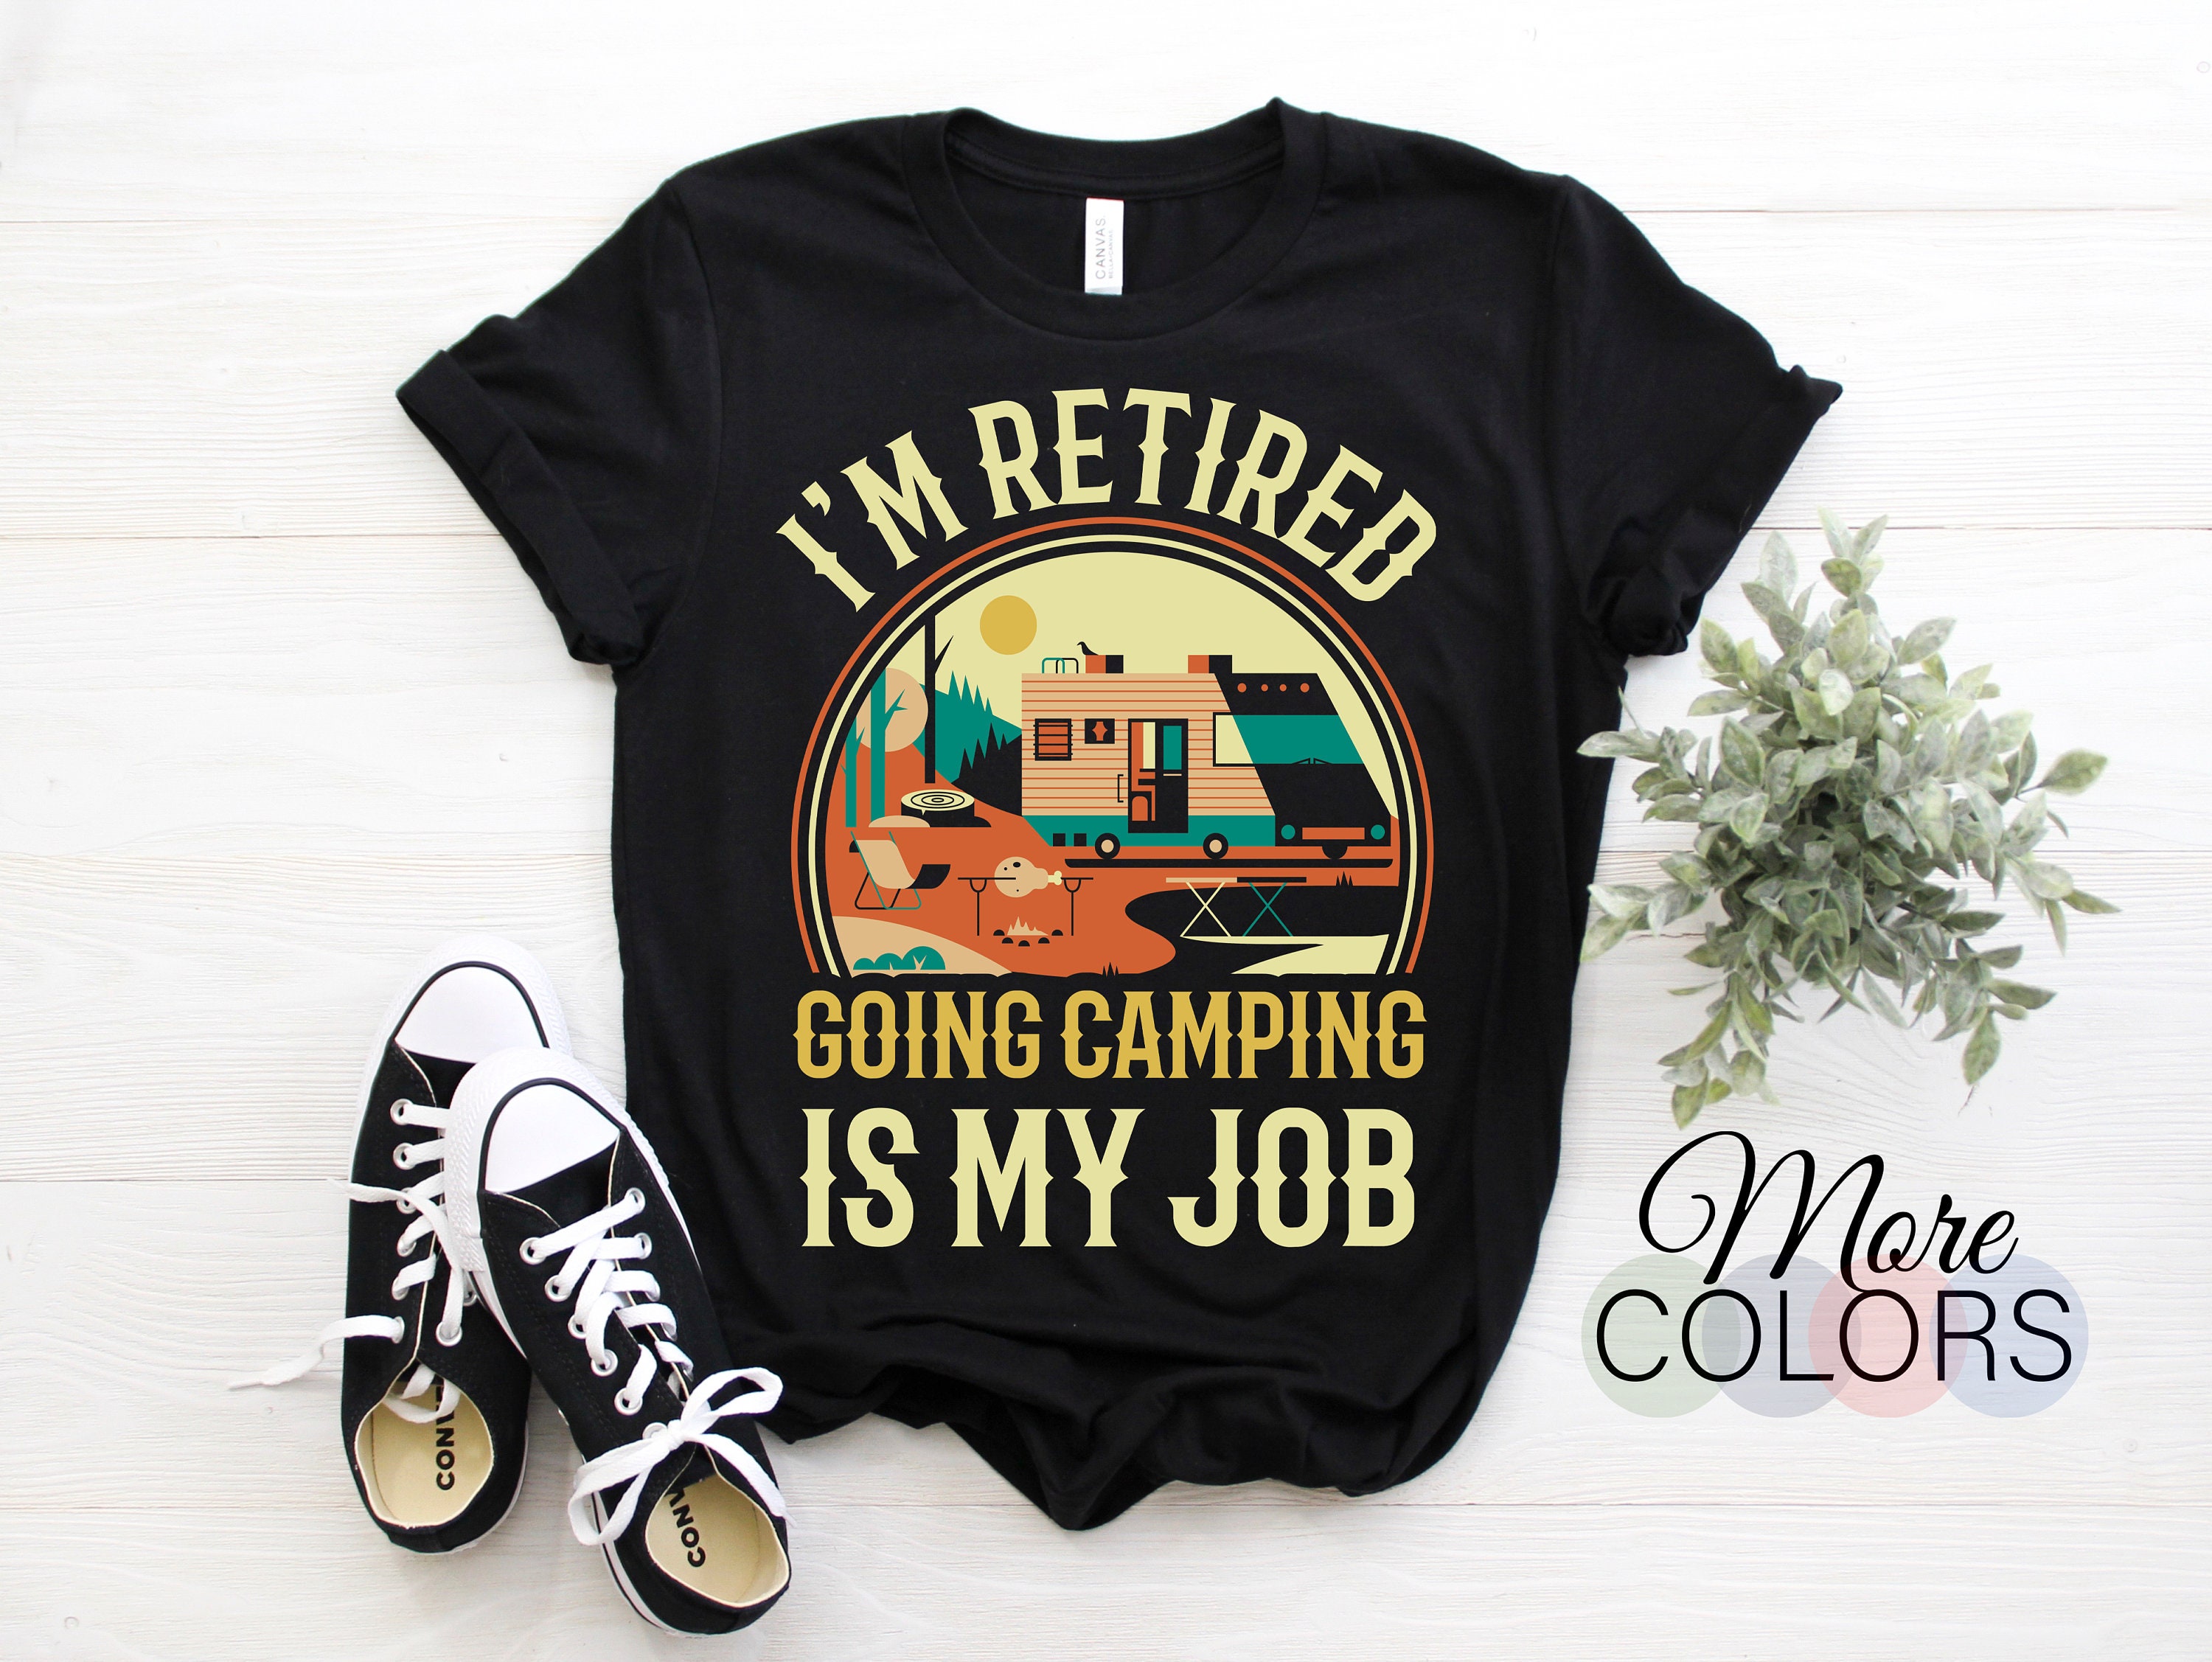  Fishing Camp Apparel - Funny Best Campers Design T-Shirt :  Clothing, Shoes & Jewelry